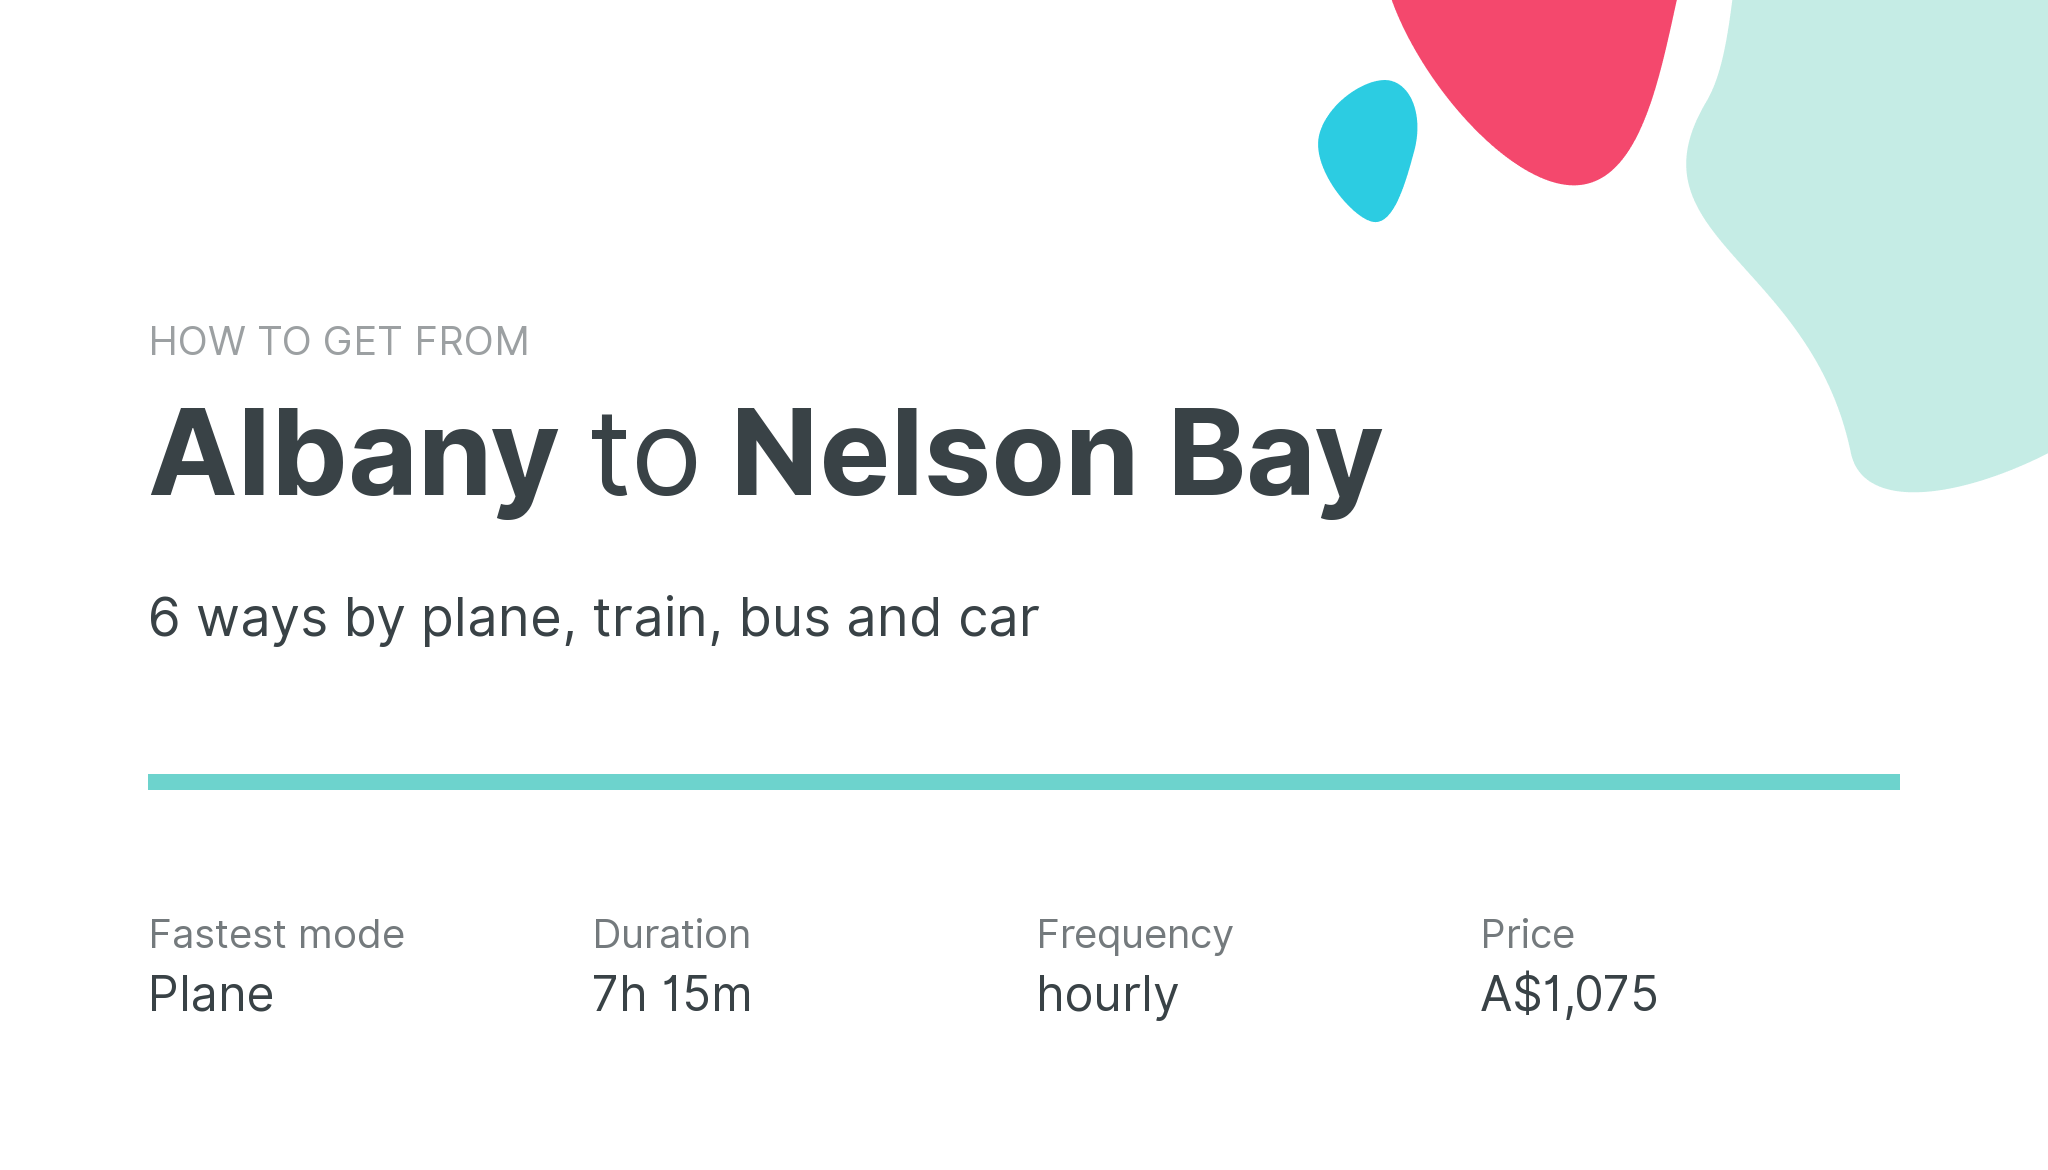 How do I get from Albany to Nelson Bay